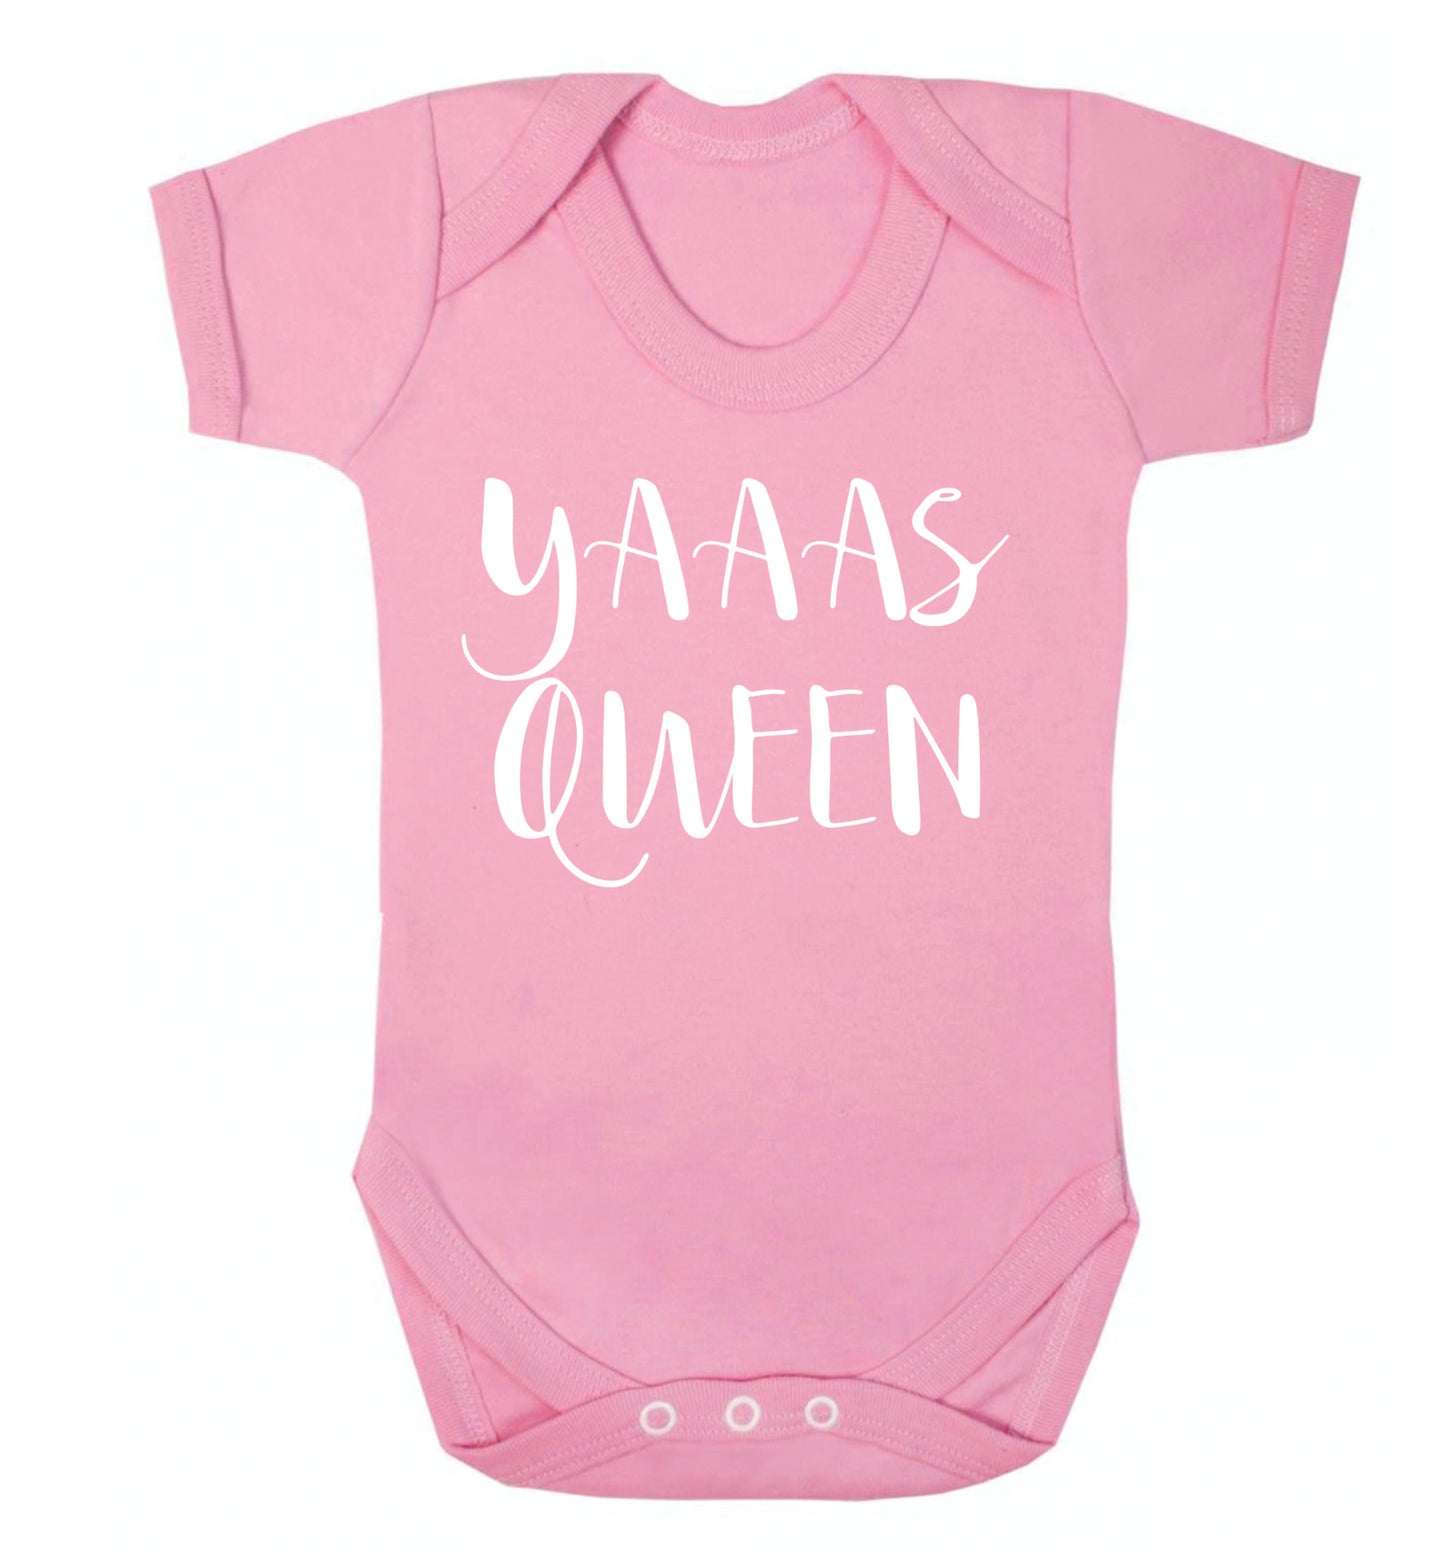 Yas Queen Baby Vest pale pink 18-24 months